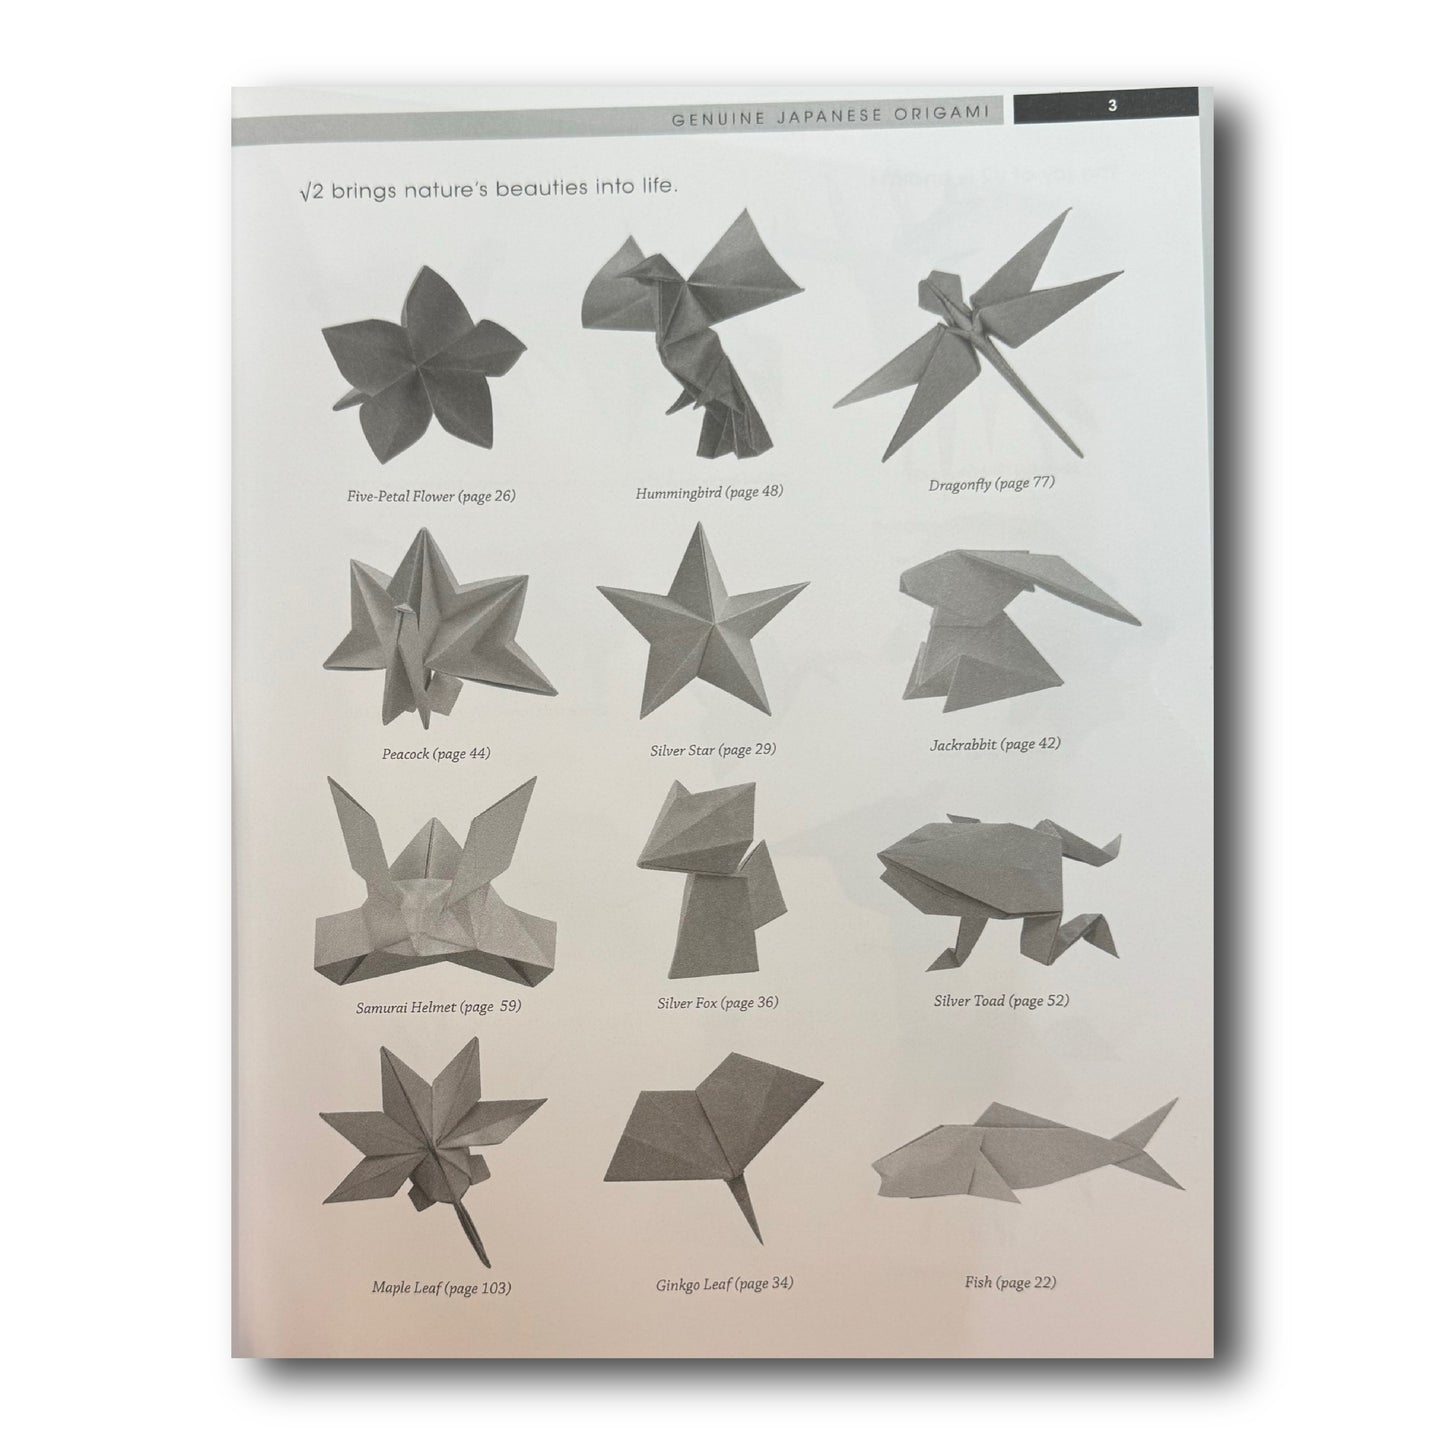 Genuine Japanese Origami, Book 1: 33 Mathematical Models Based Upon (the square root of) 2